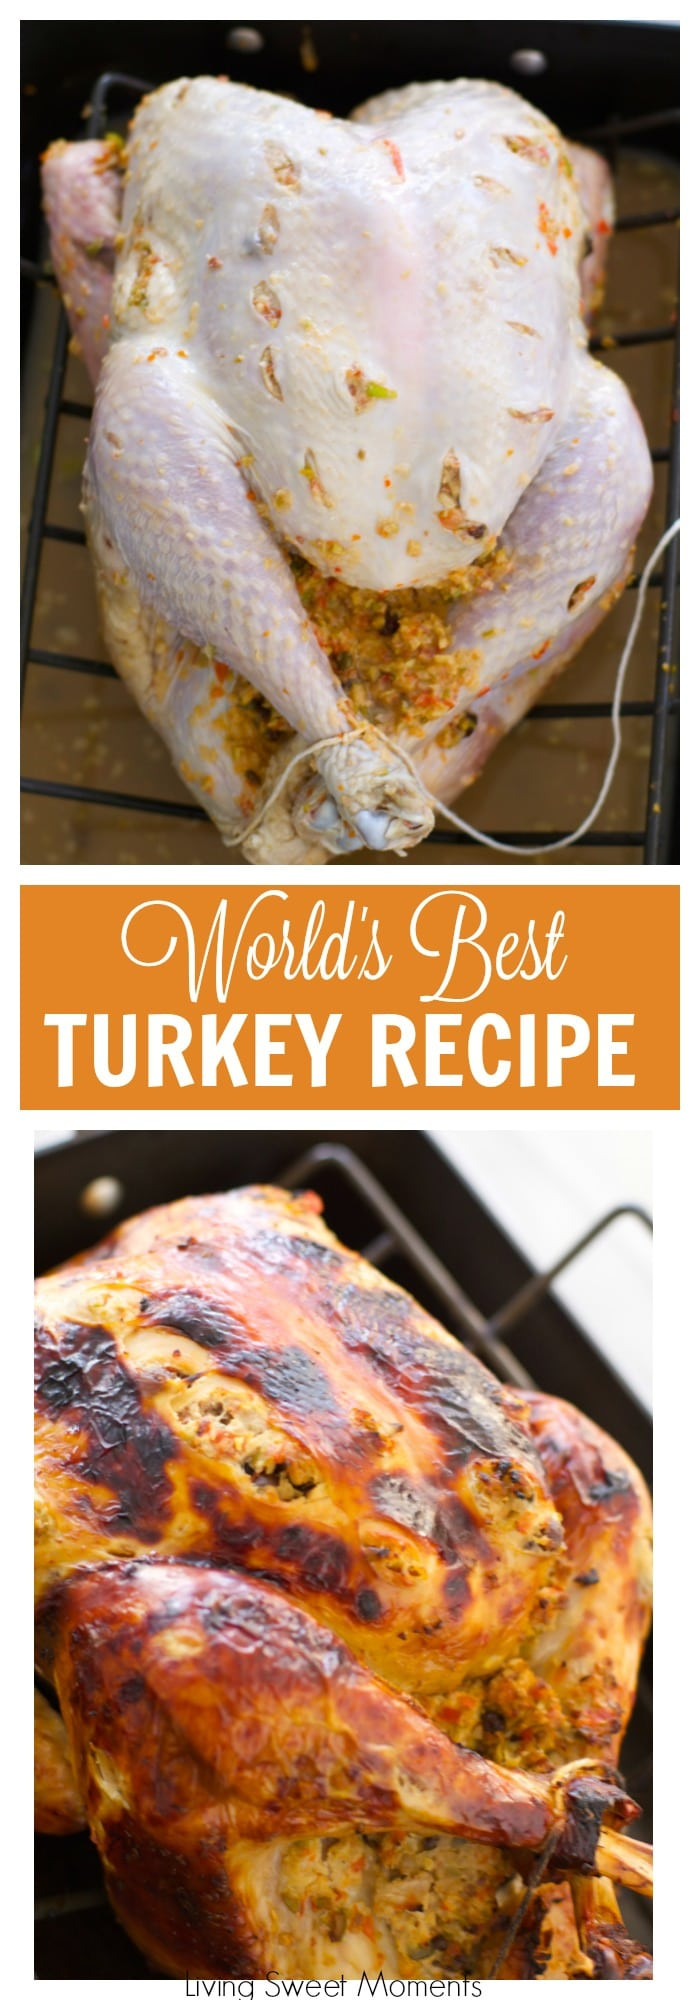 Best Turkey Recipes For Thanksgiving
 The World s Best Turkey Recipe A Tutorial Living Sweet